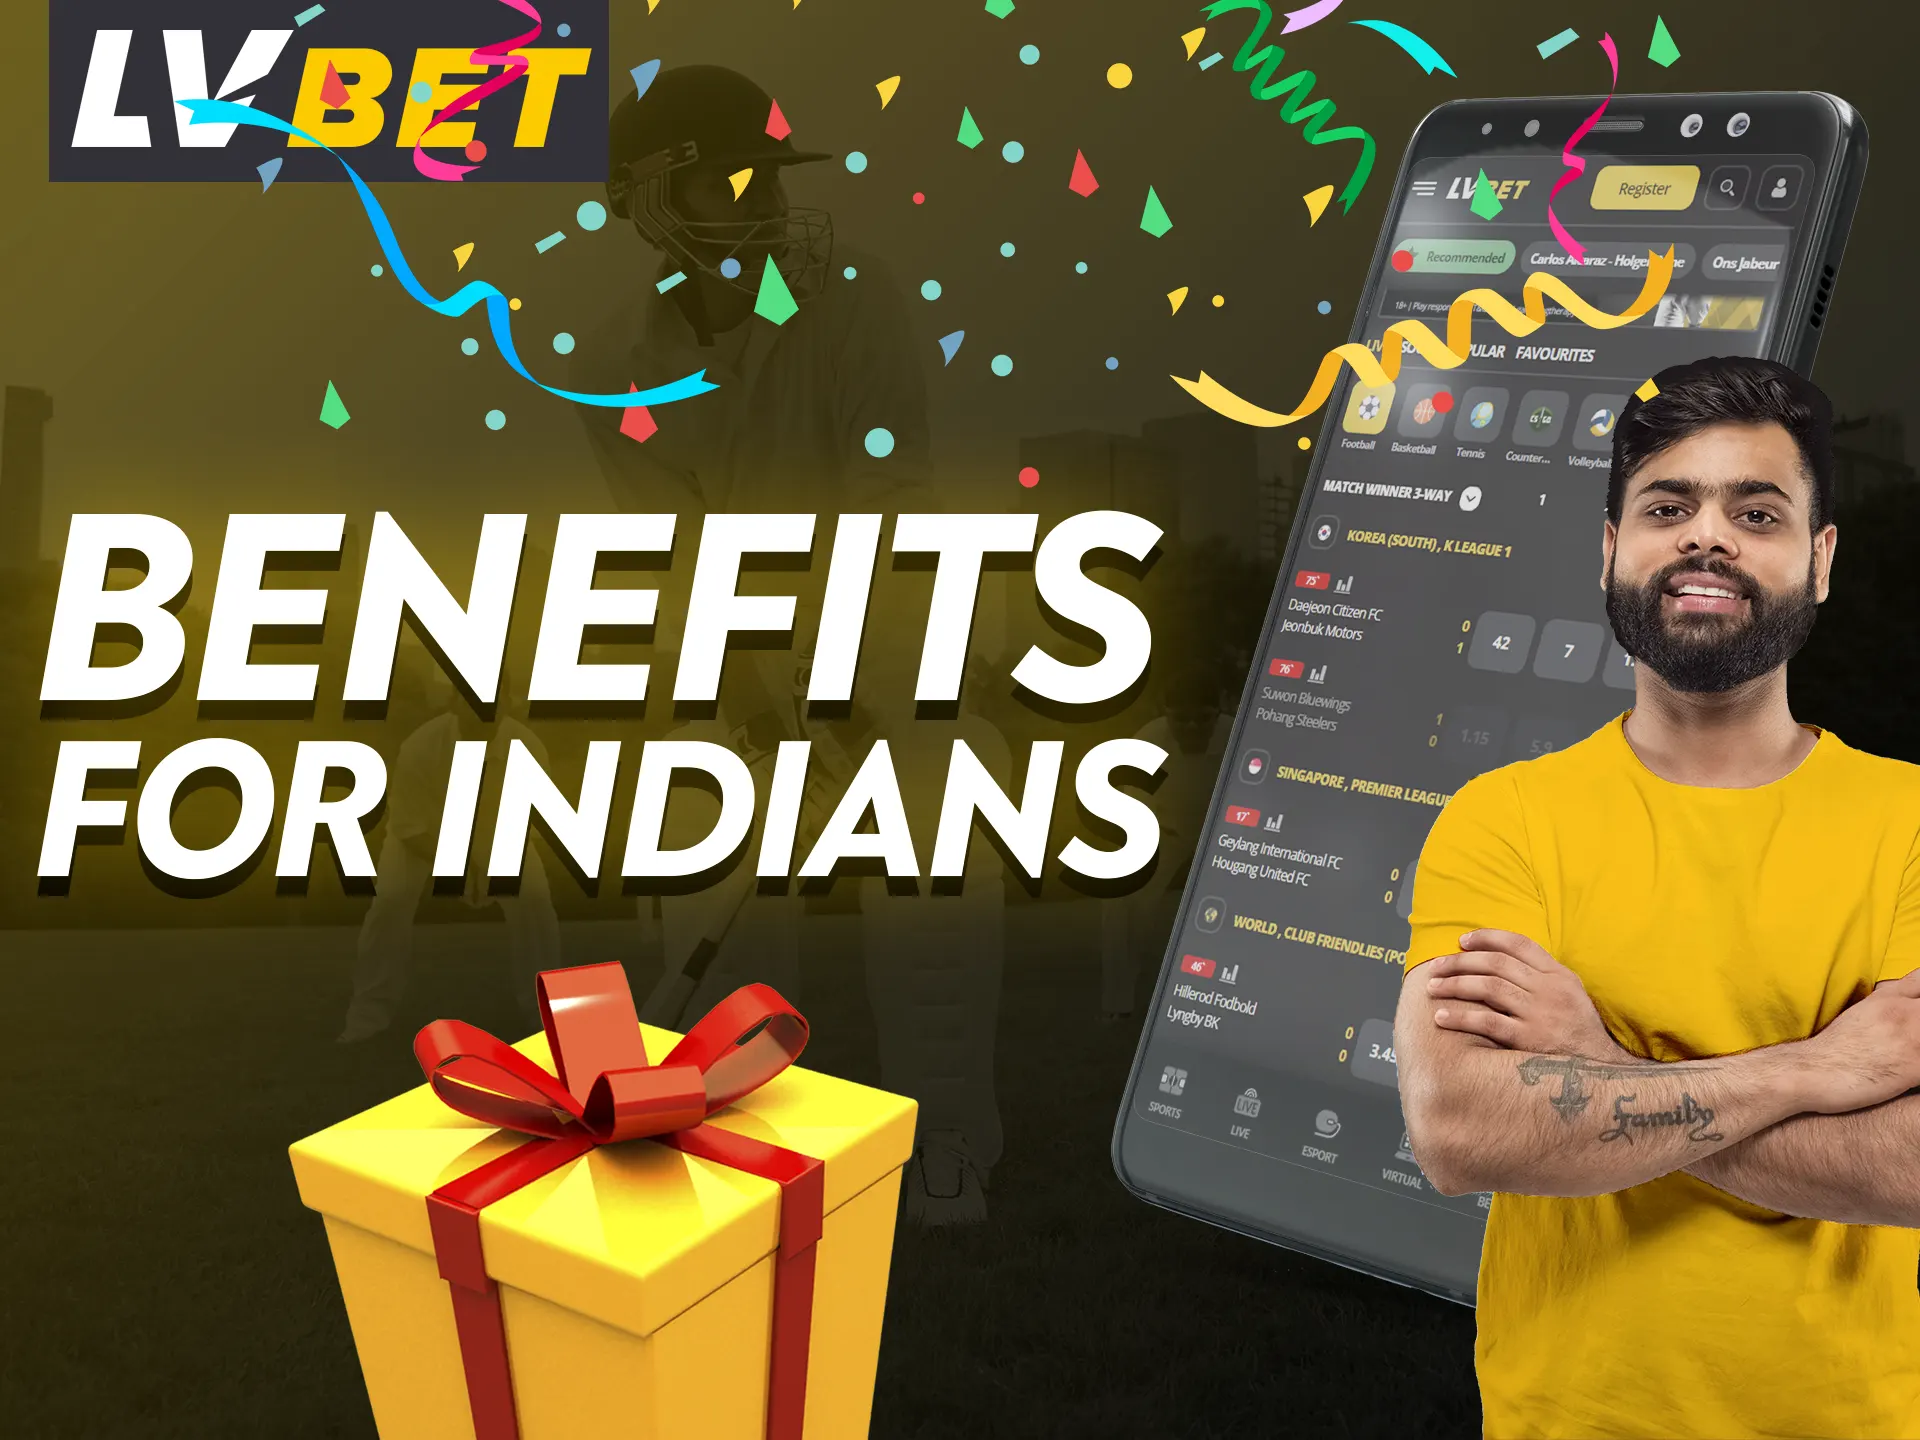 The LV Bet app has many bonuses and benefits for players.